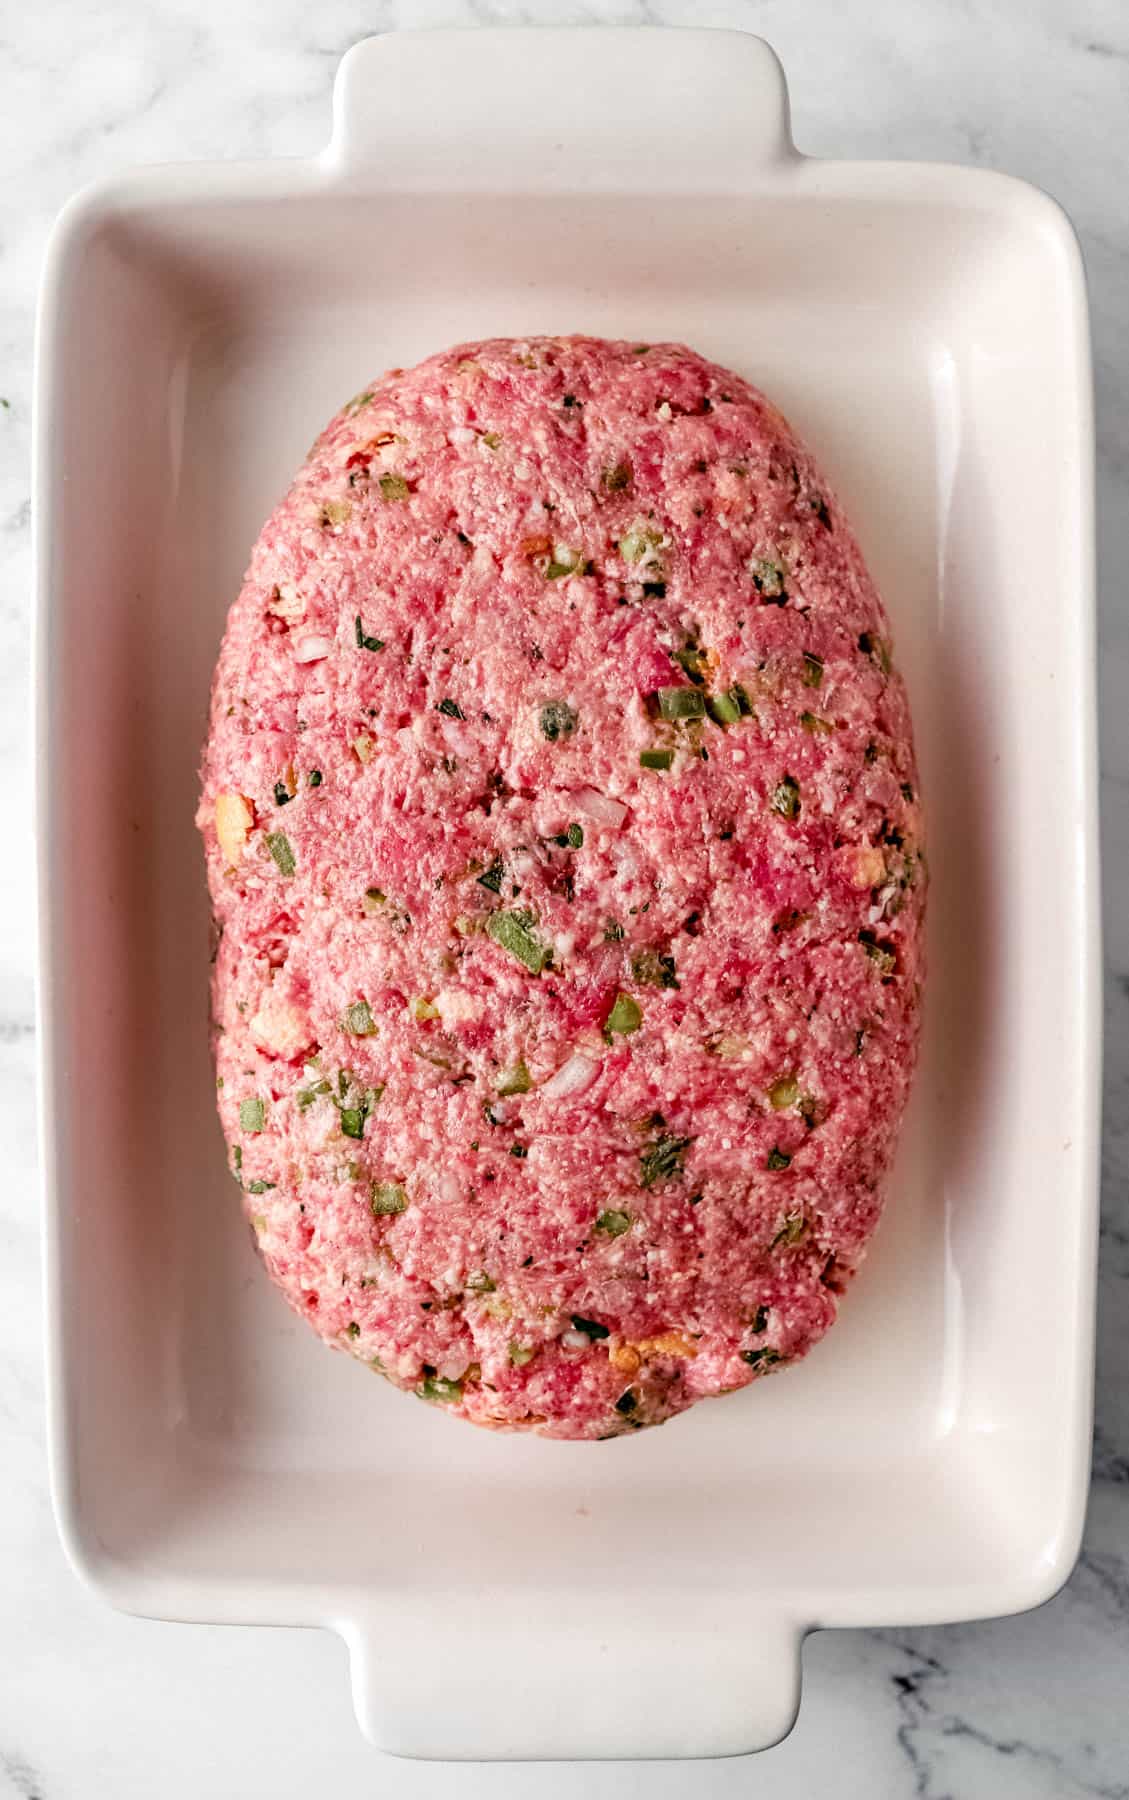 Meat mixture formed into loaf in a white rectangle baking dish. 